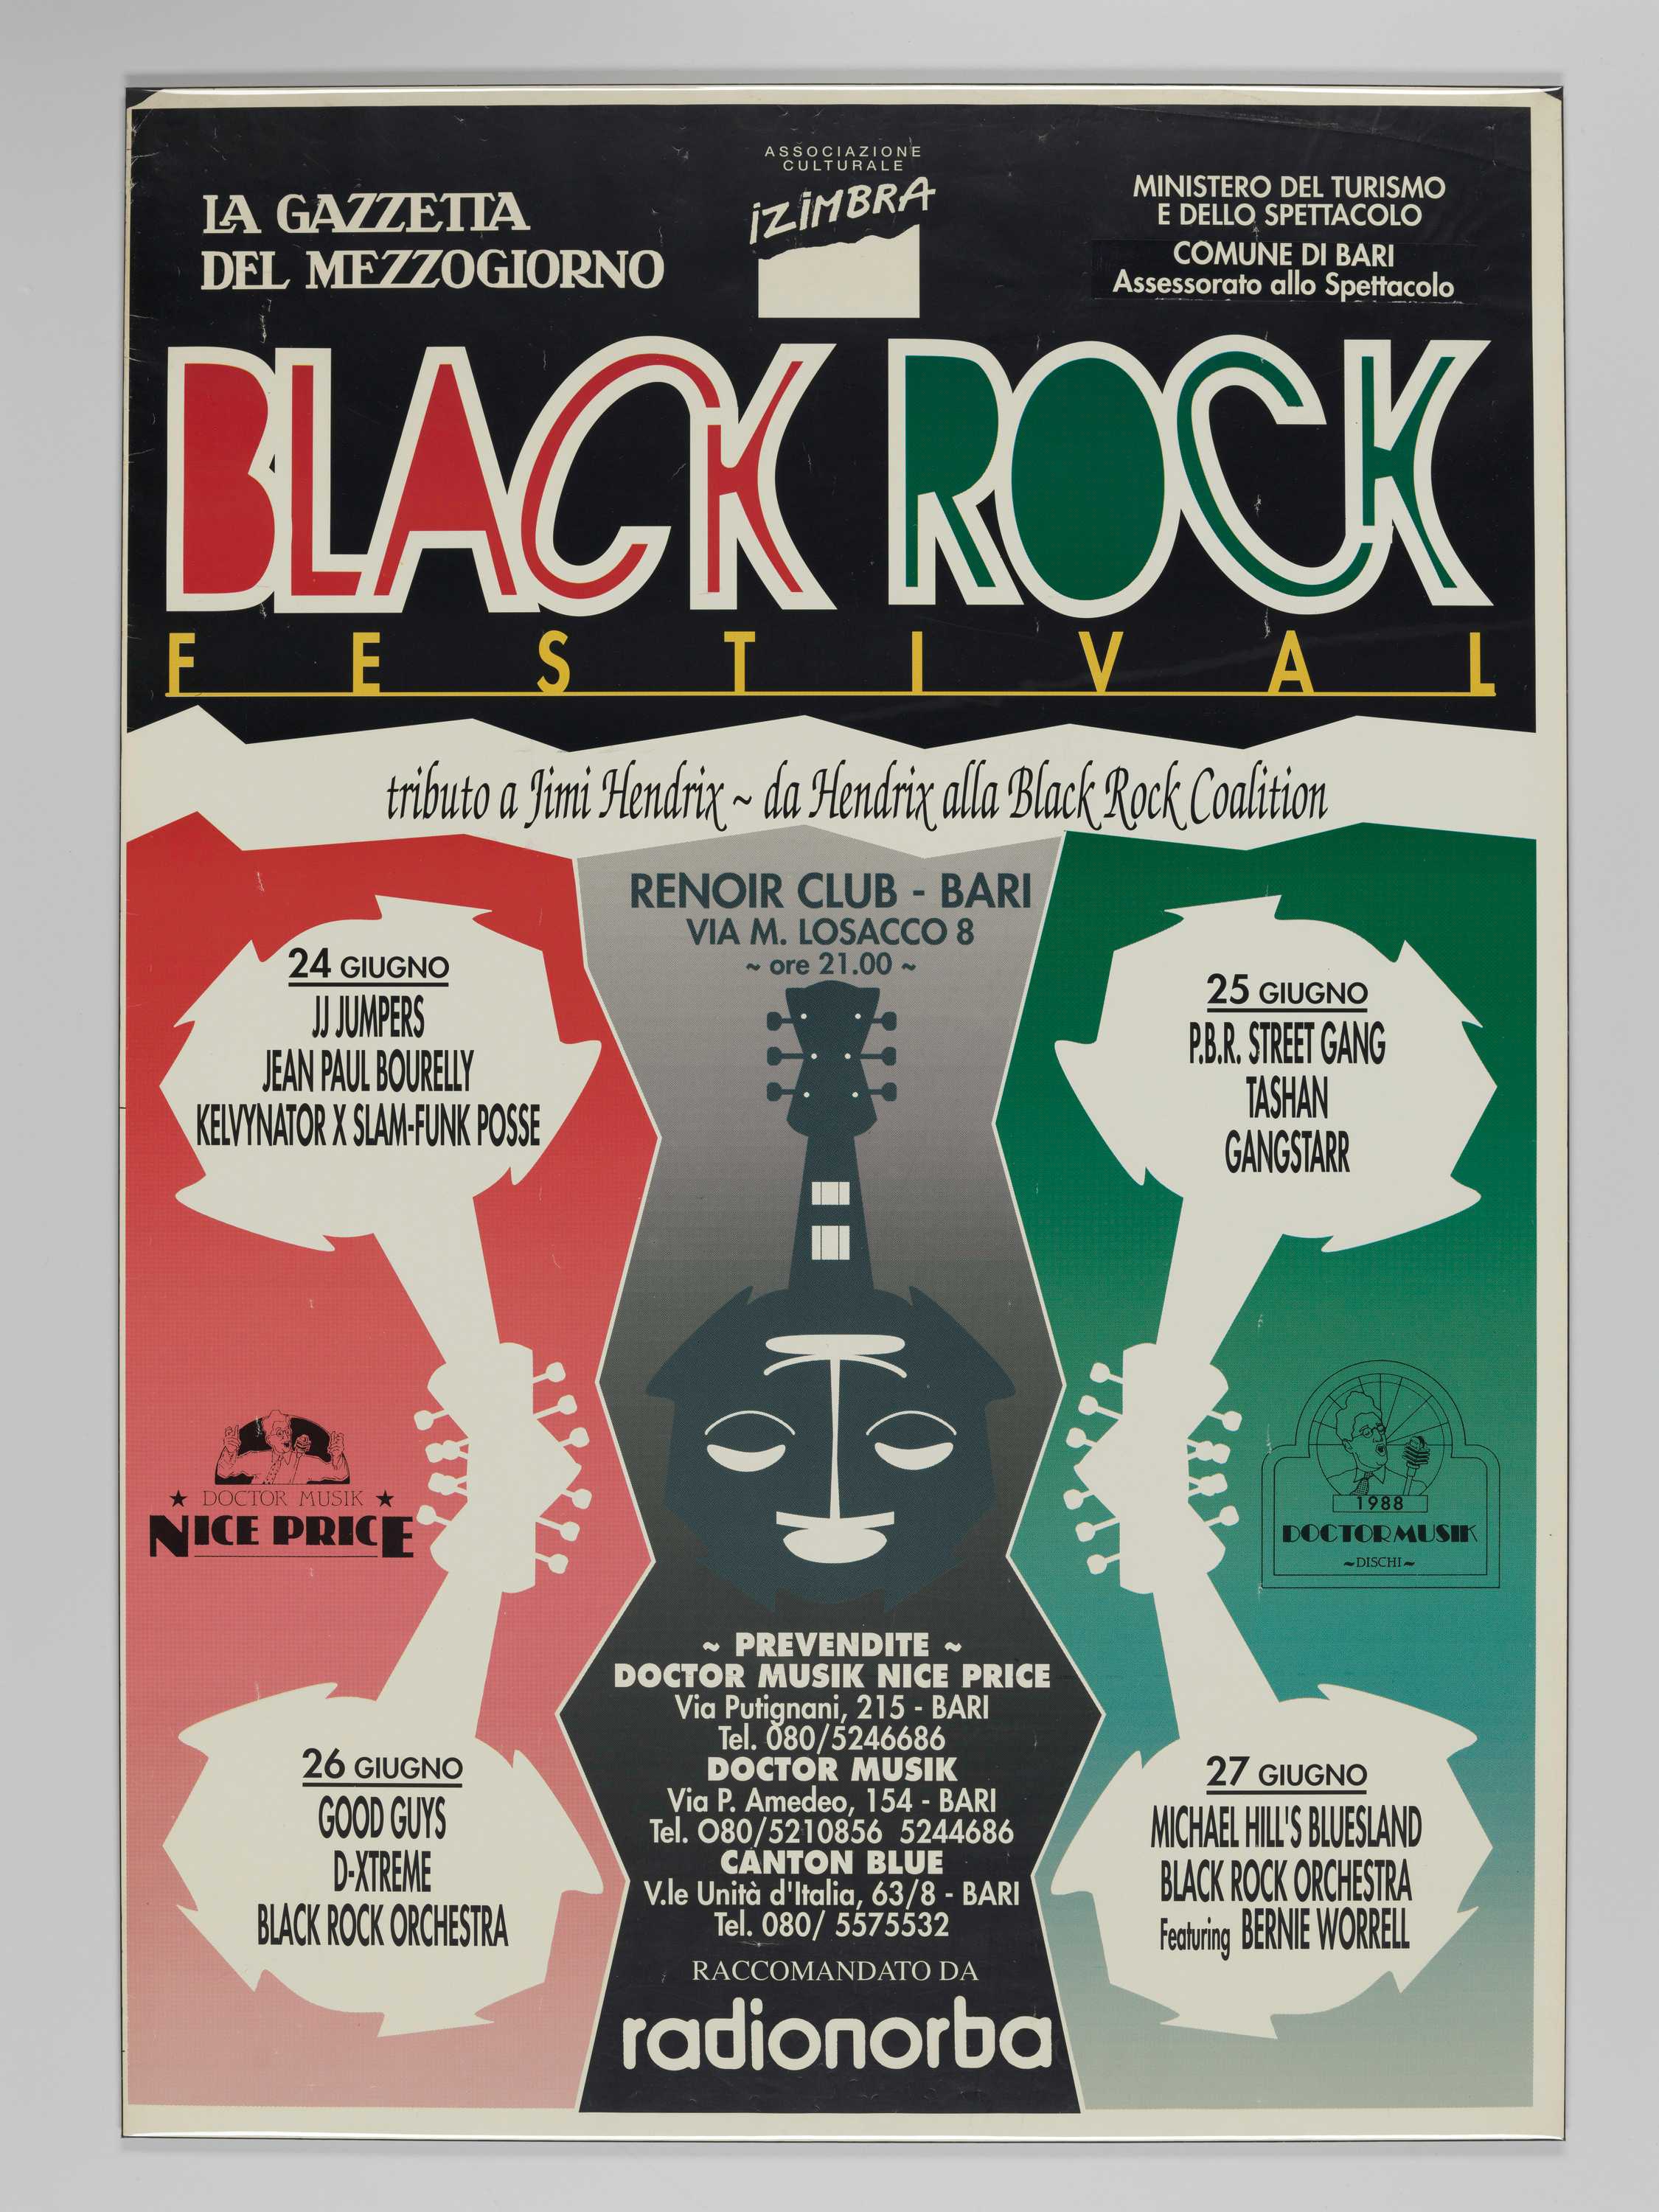 A poster in green, red, and black, titled with "Black Rock Festival" at the top.